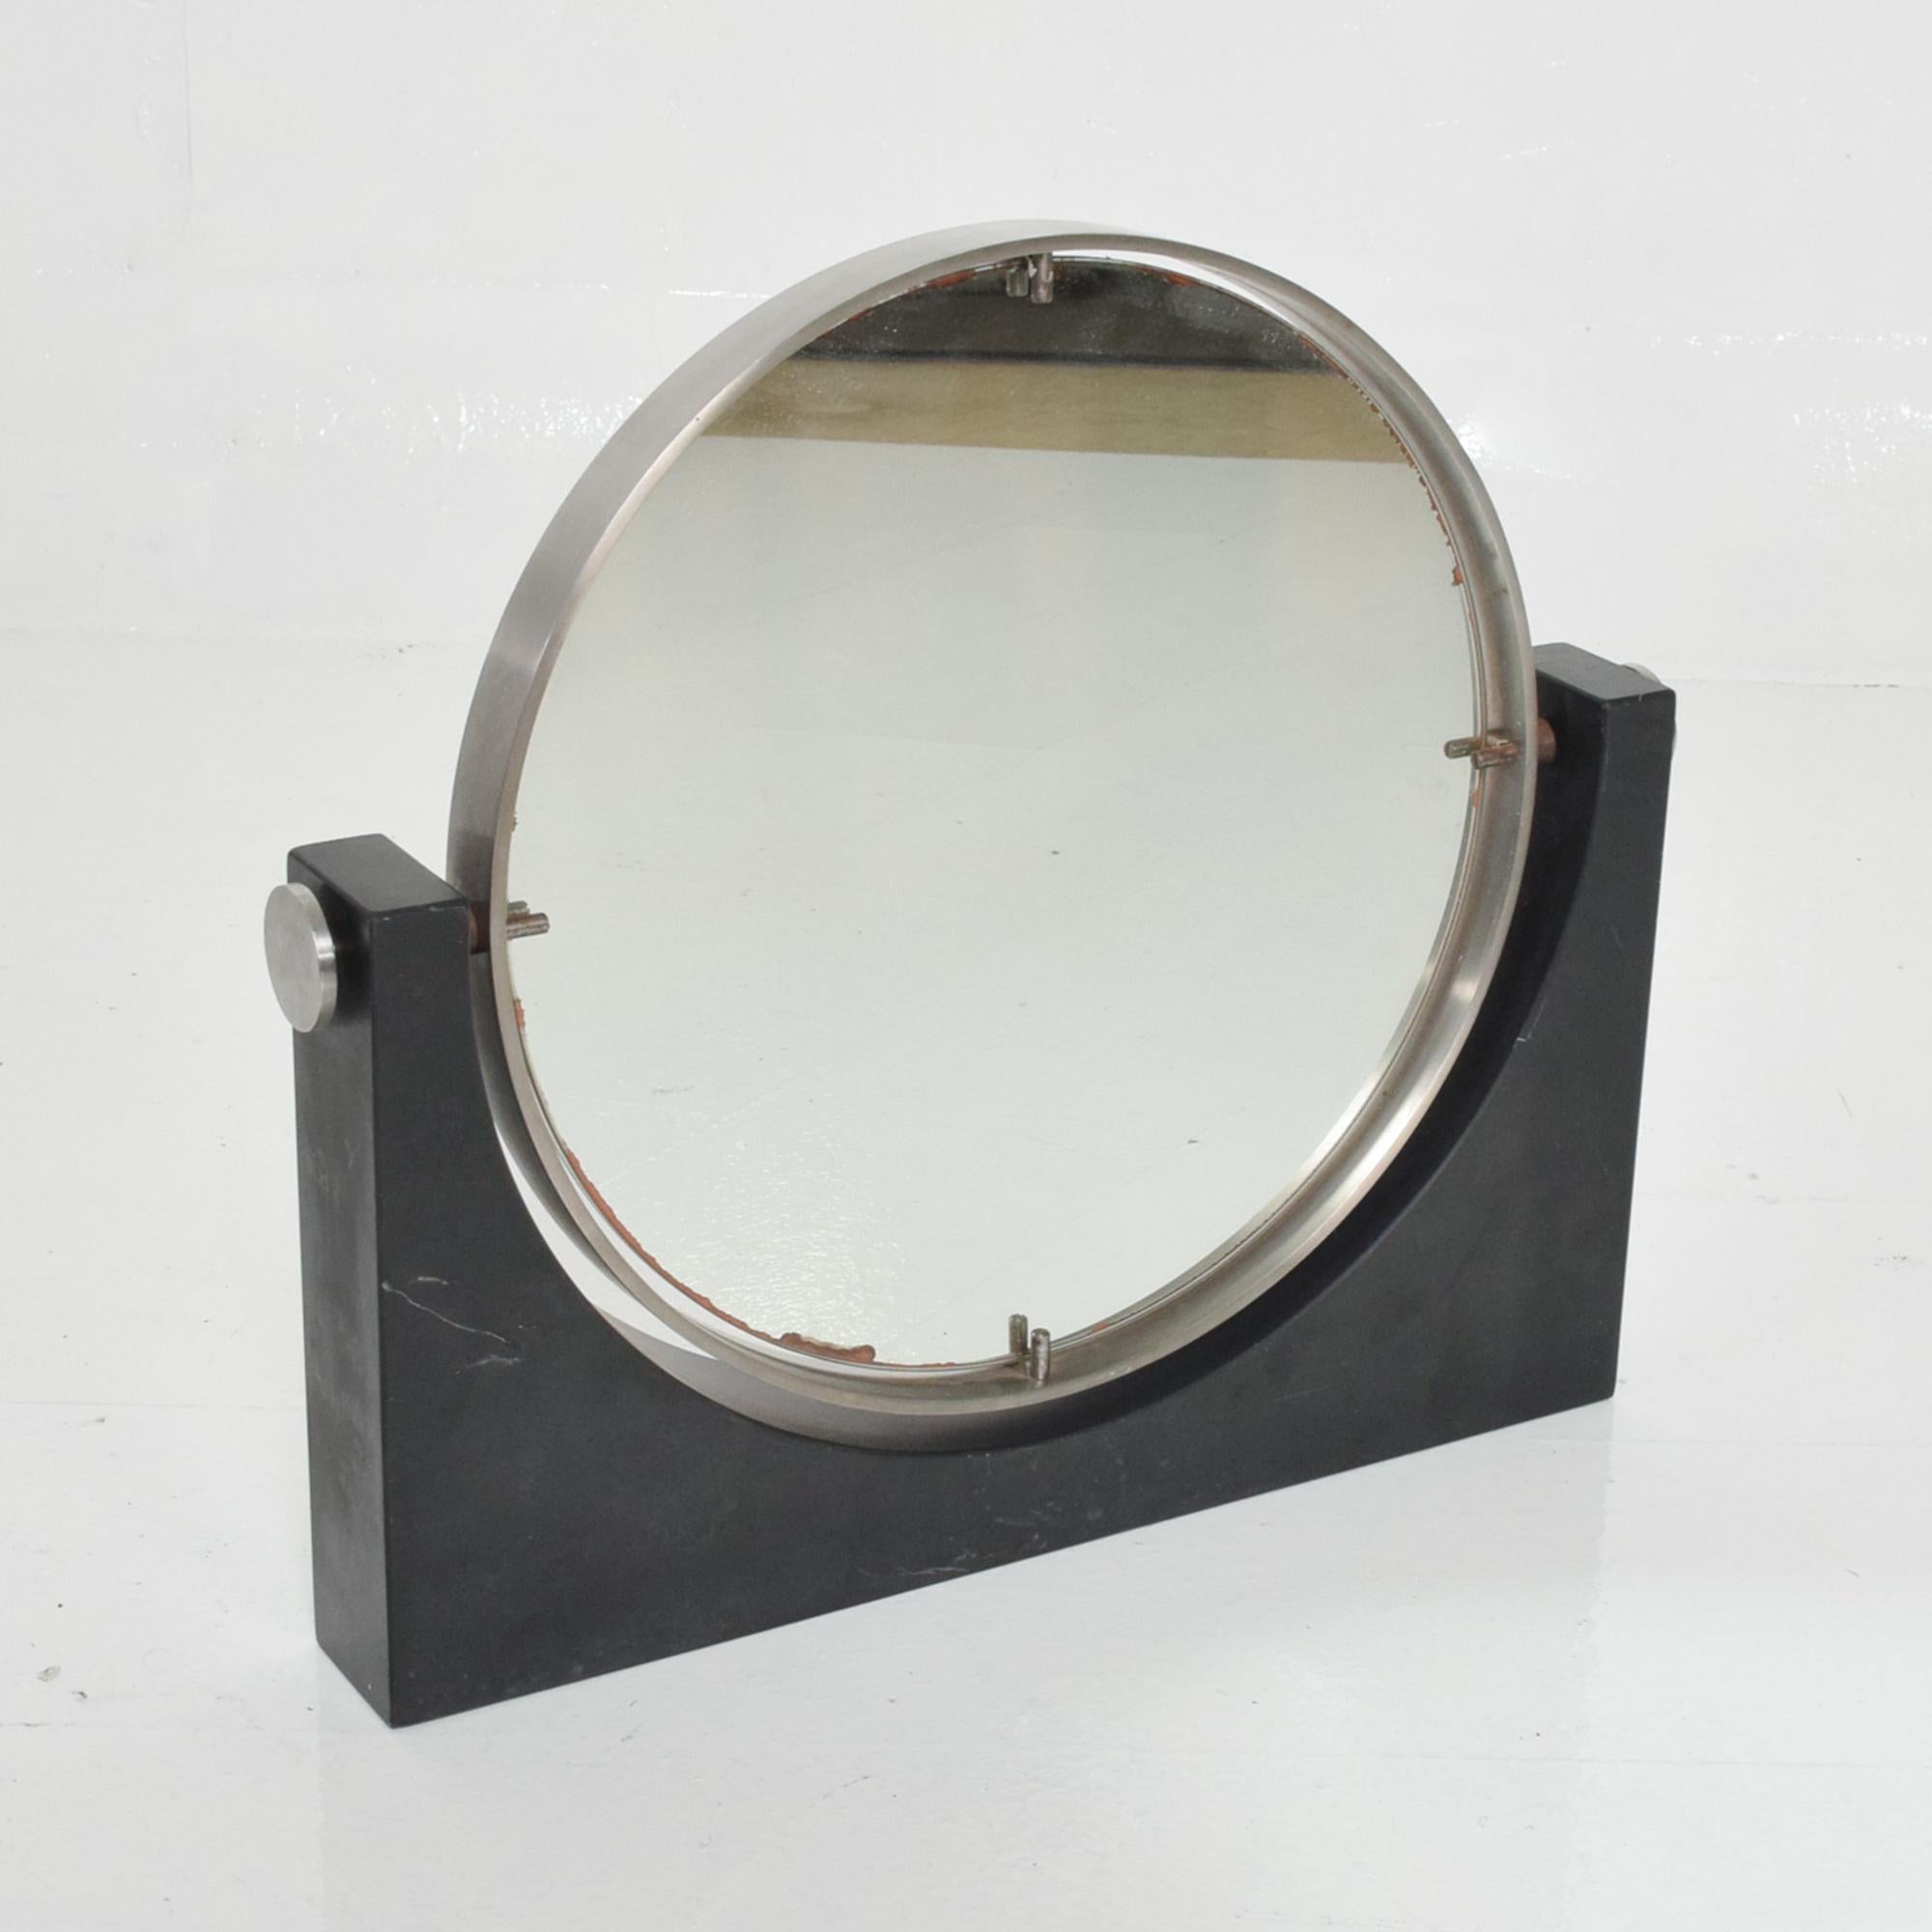 Angelo Mangiarotti Italian Modern Tabletop Vanity Makeup Mirror
Carrara Black Marble & Stainless Steel.
Made in Italy circa 1970s.
Unmarked.
Double side pivoting mirror.
16 H x 18W x 2.25D, Mirror 13.25 in diameter
Original vintage good preowned